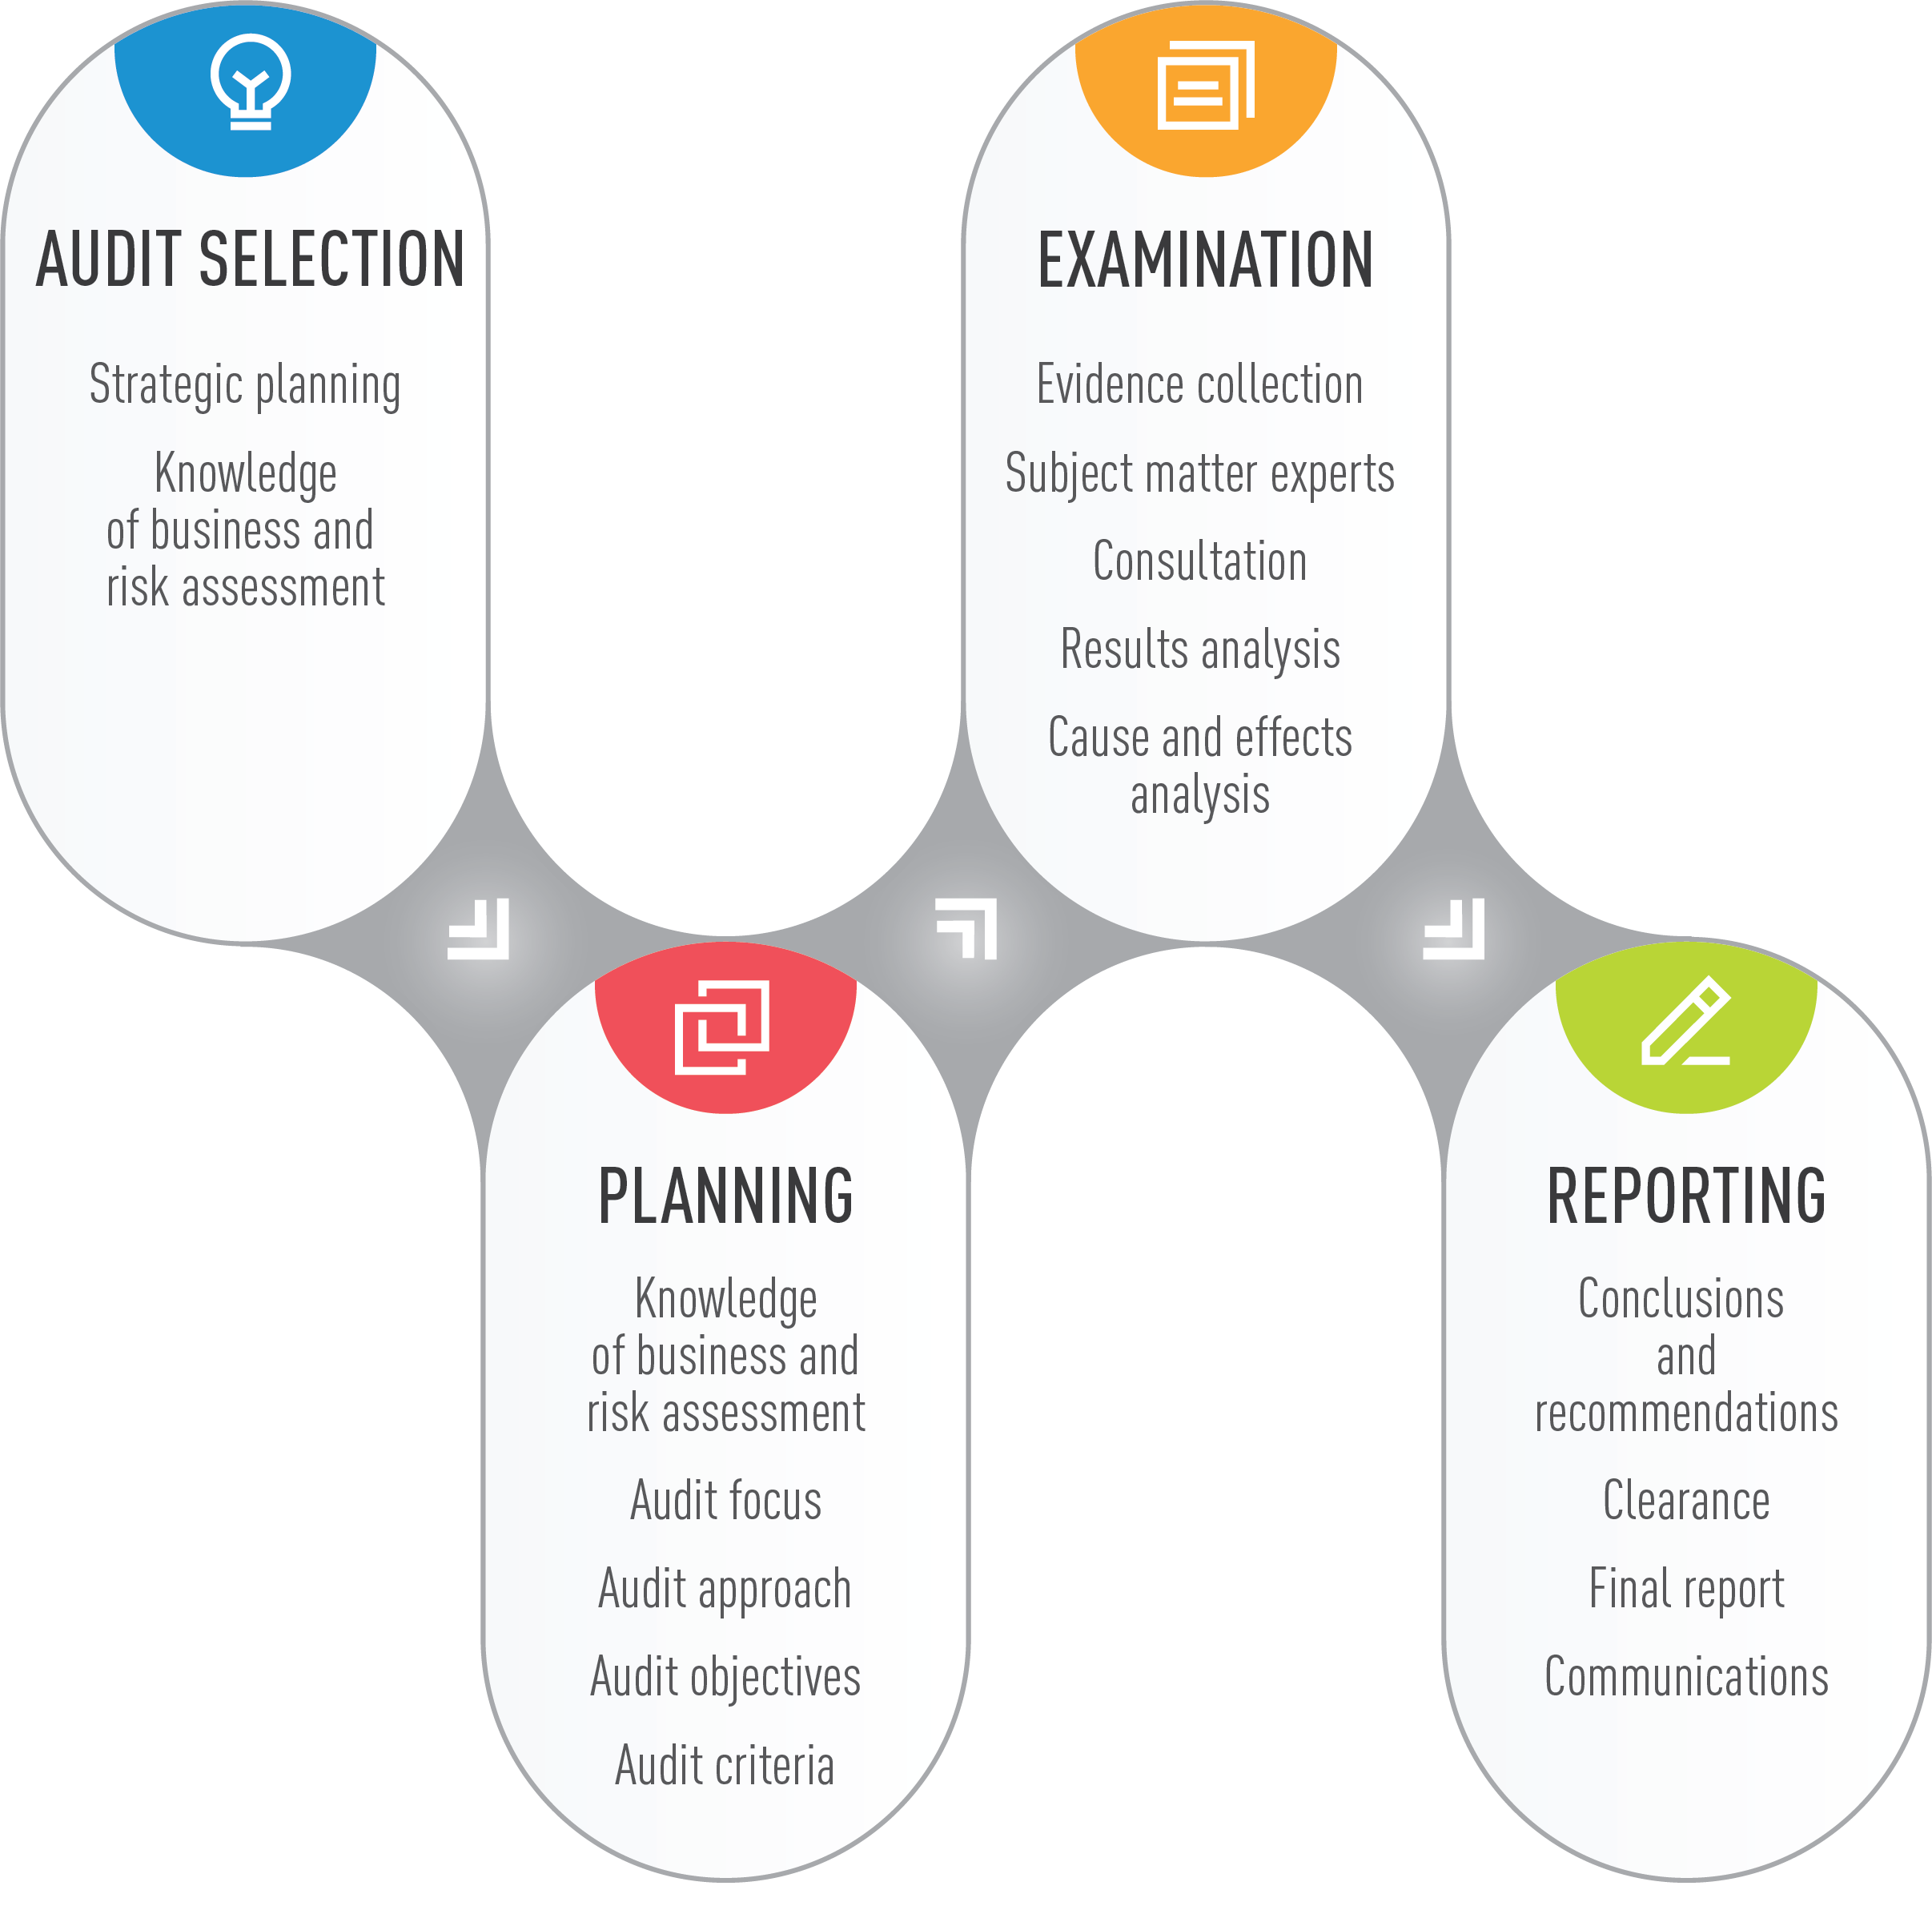 Overview of the Performance Audit Process